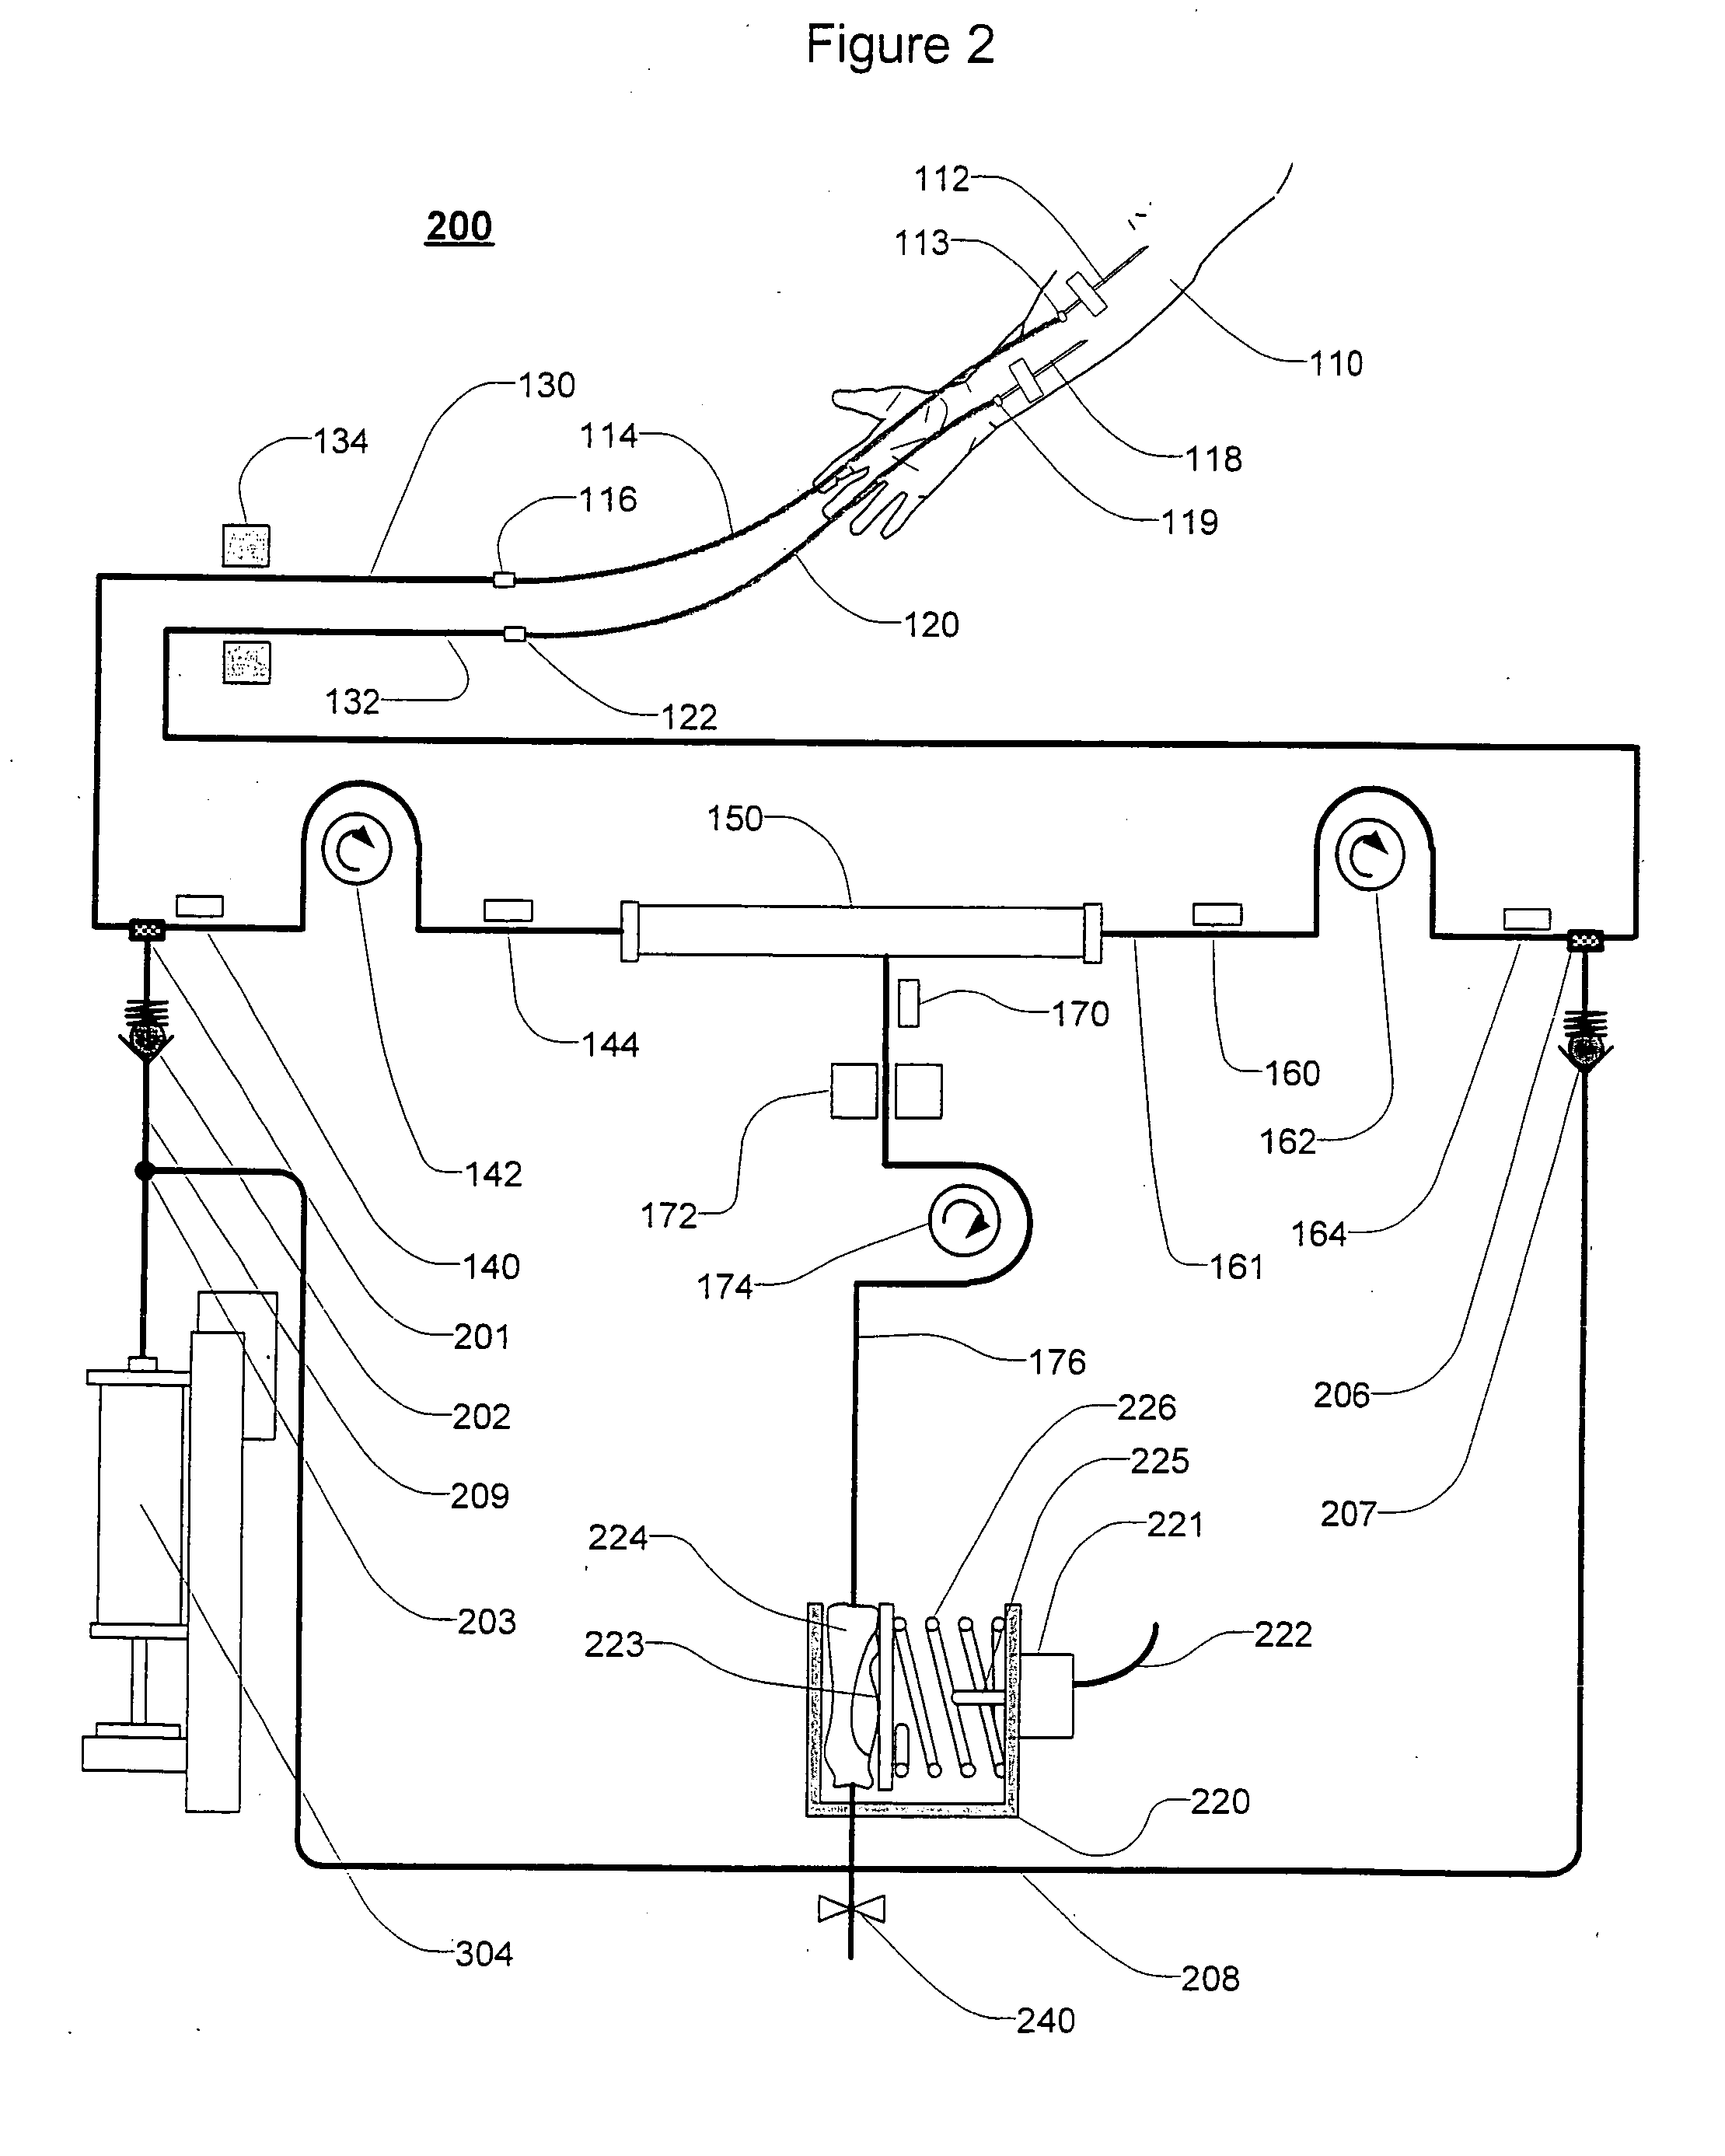 Extracorporeal blood treatment and system having reversible blood pumps